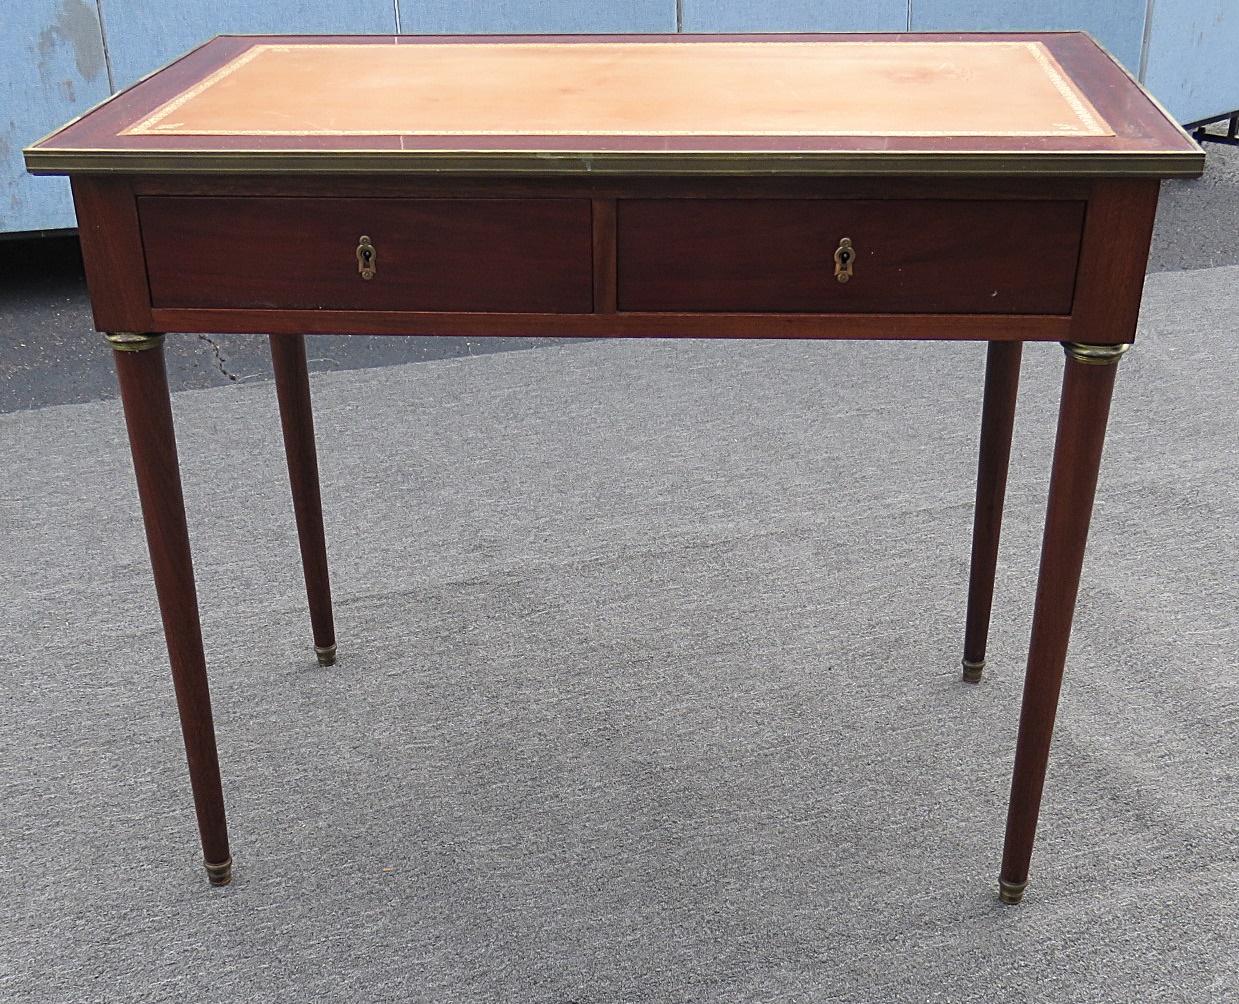 Regency style leather top two drawer desk with bronze accents.